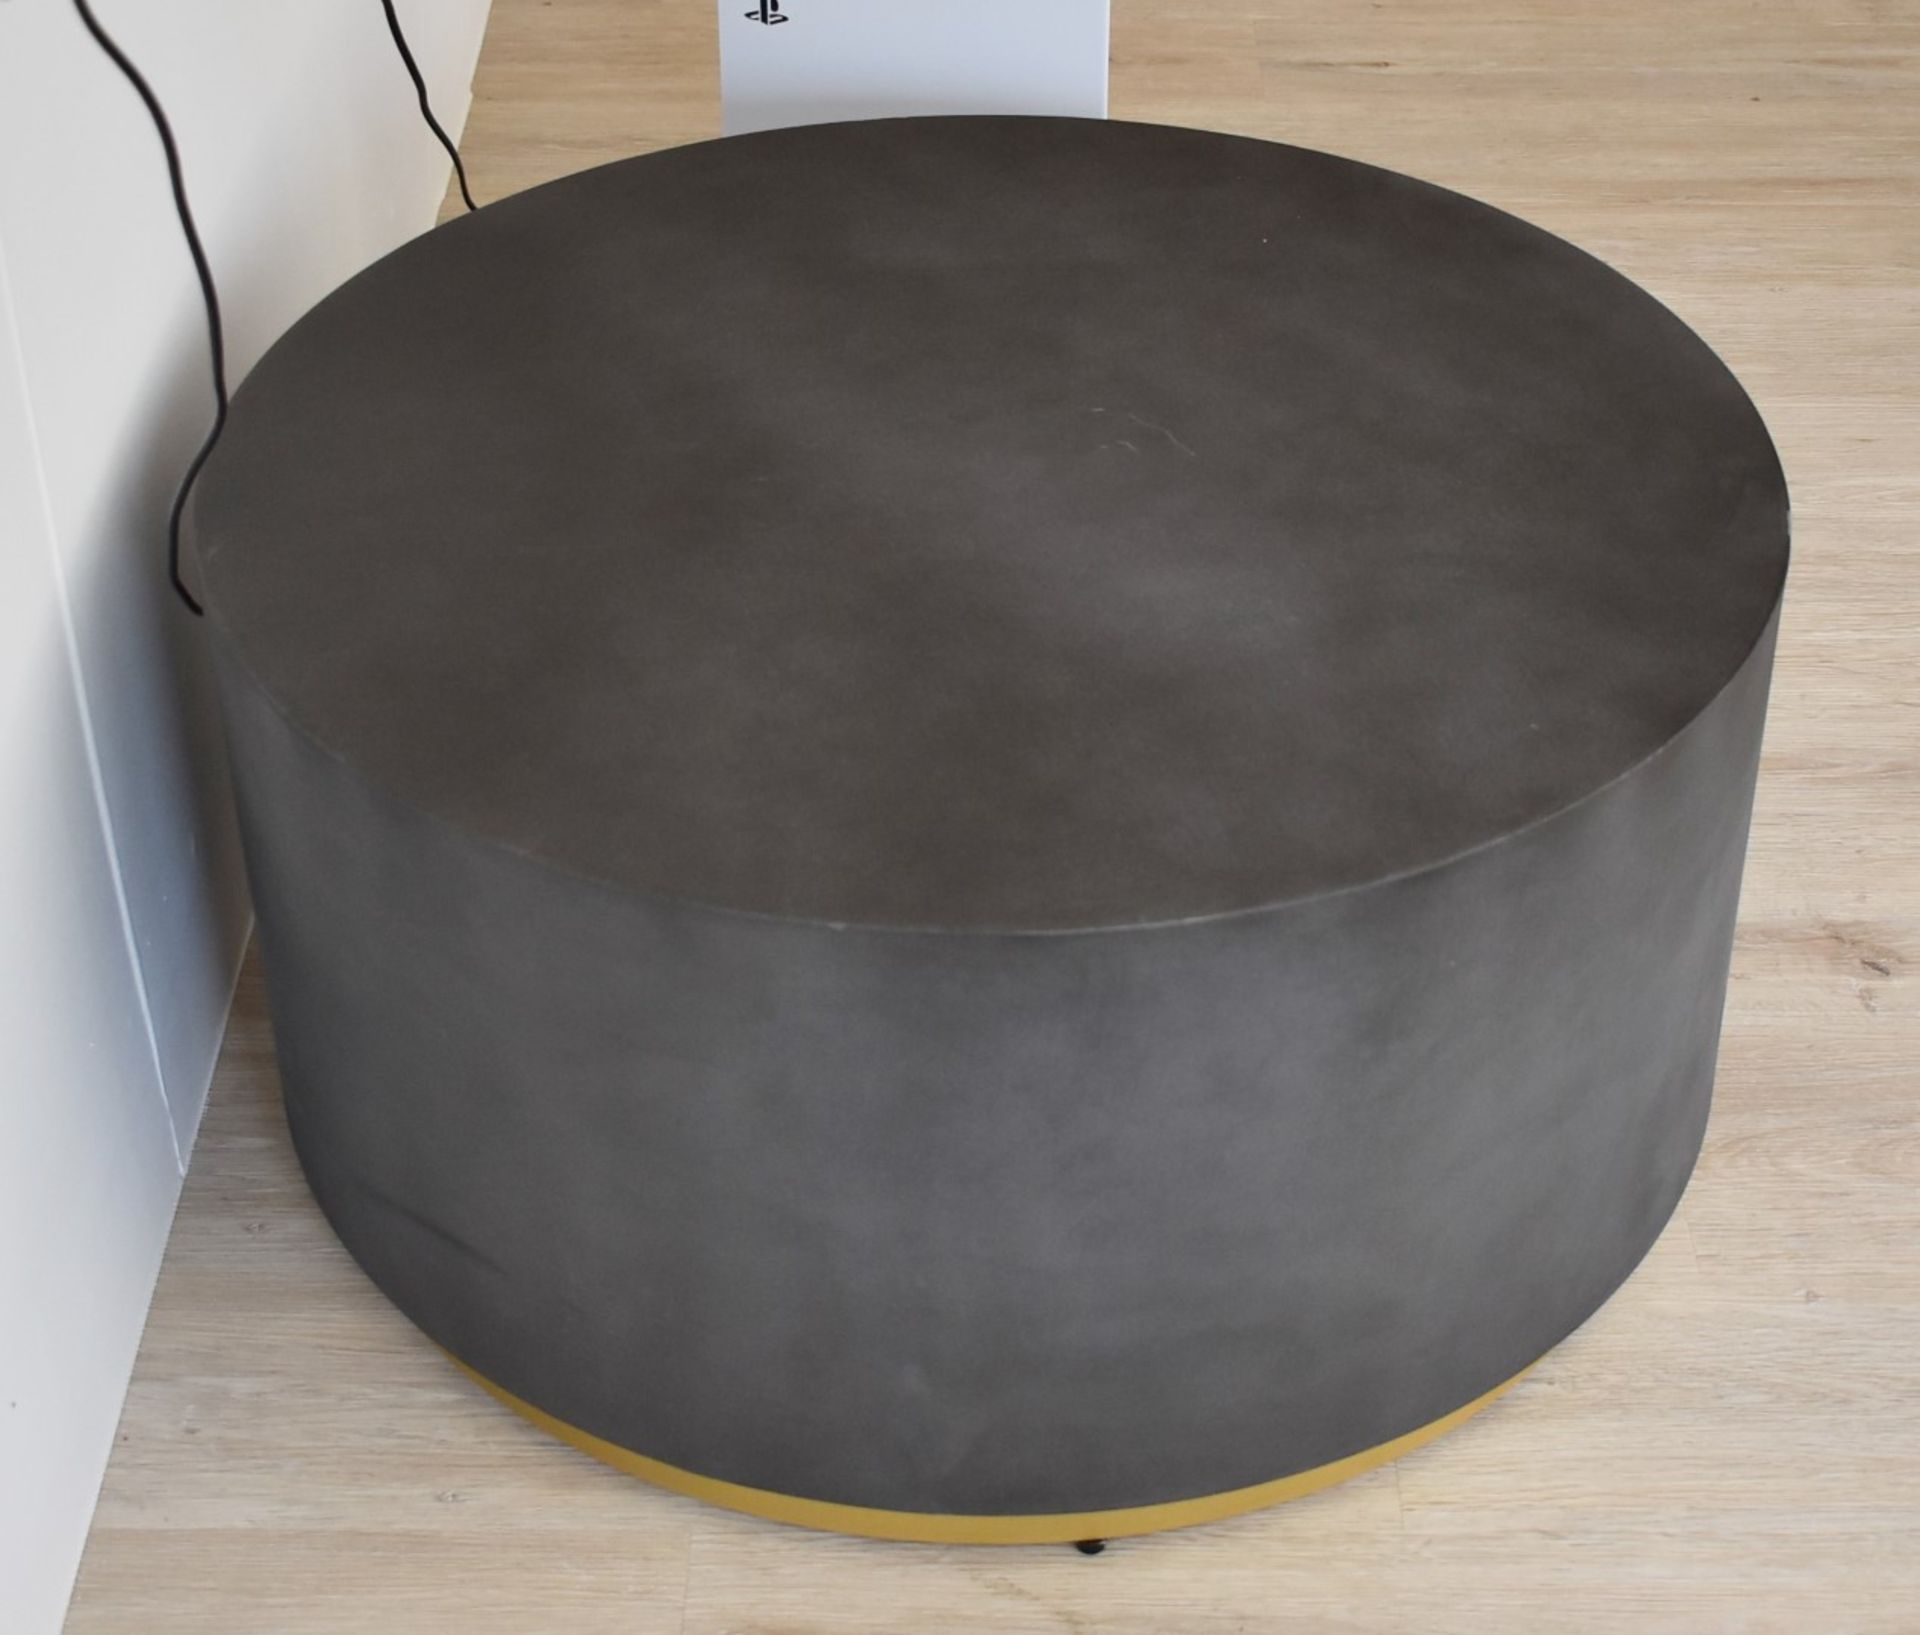 1 x Round Coffee Table With Concrete Effect Finish and Gold Base - RRP £455 - NO VAT ON THE HAMMER! - Image 4 of 7